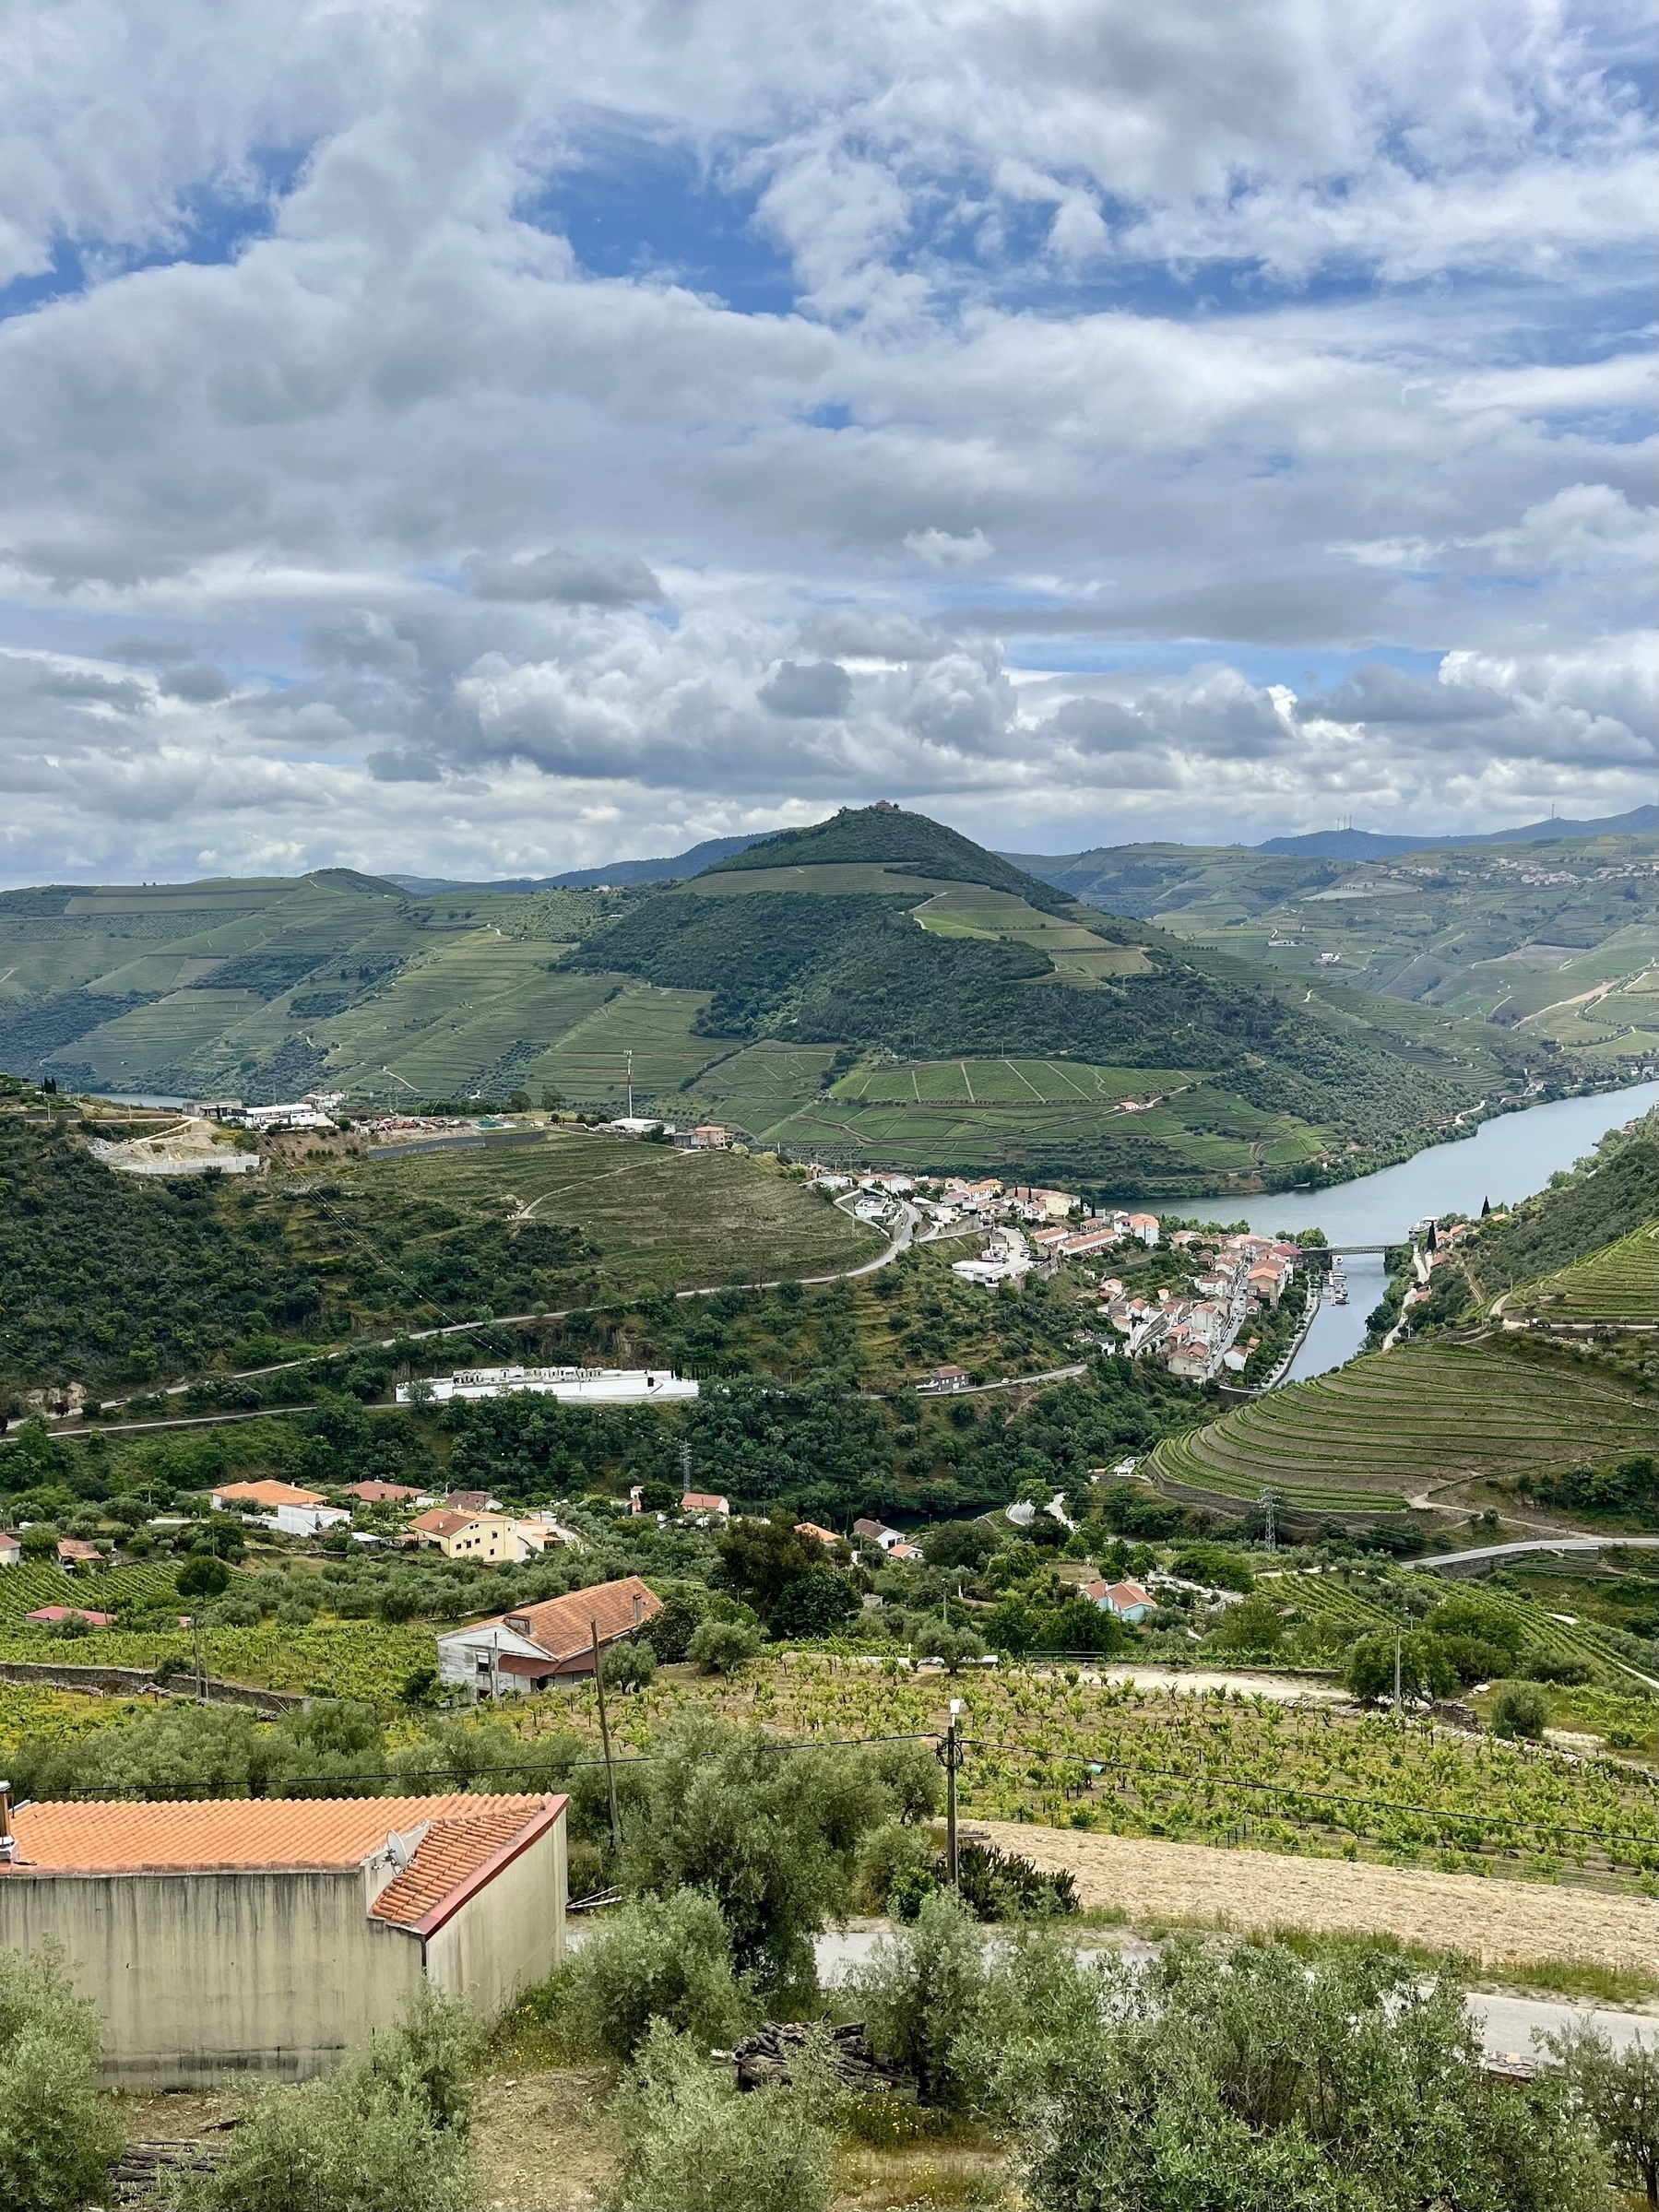 A verdant valley with vineyards and a winding river, with houses scattered throughout, under a cloudy sky.